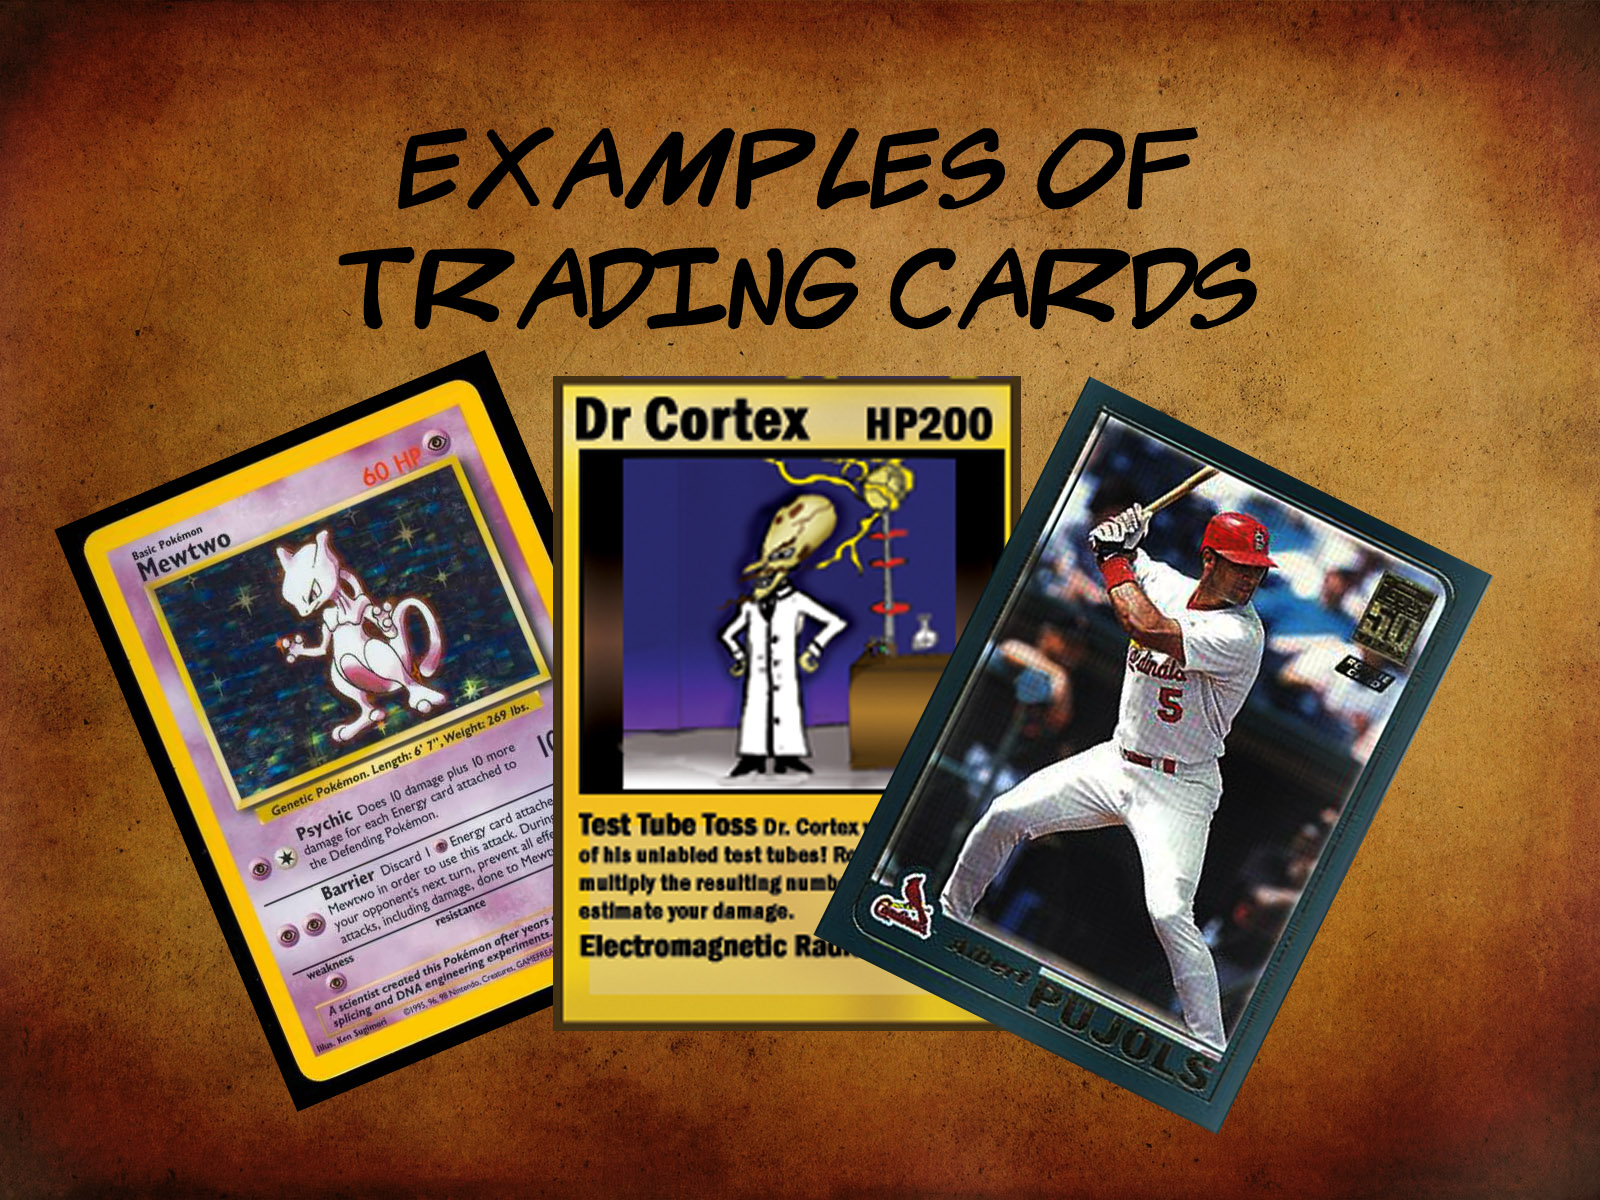 Make the Card - Make your own Trading Card!